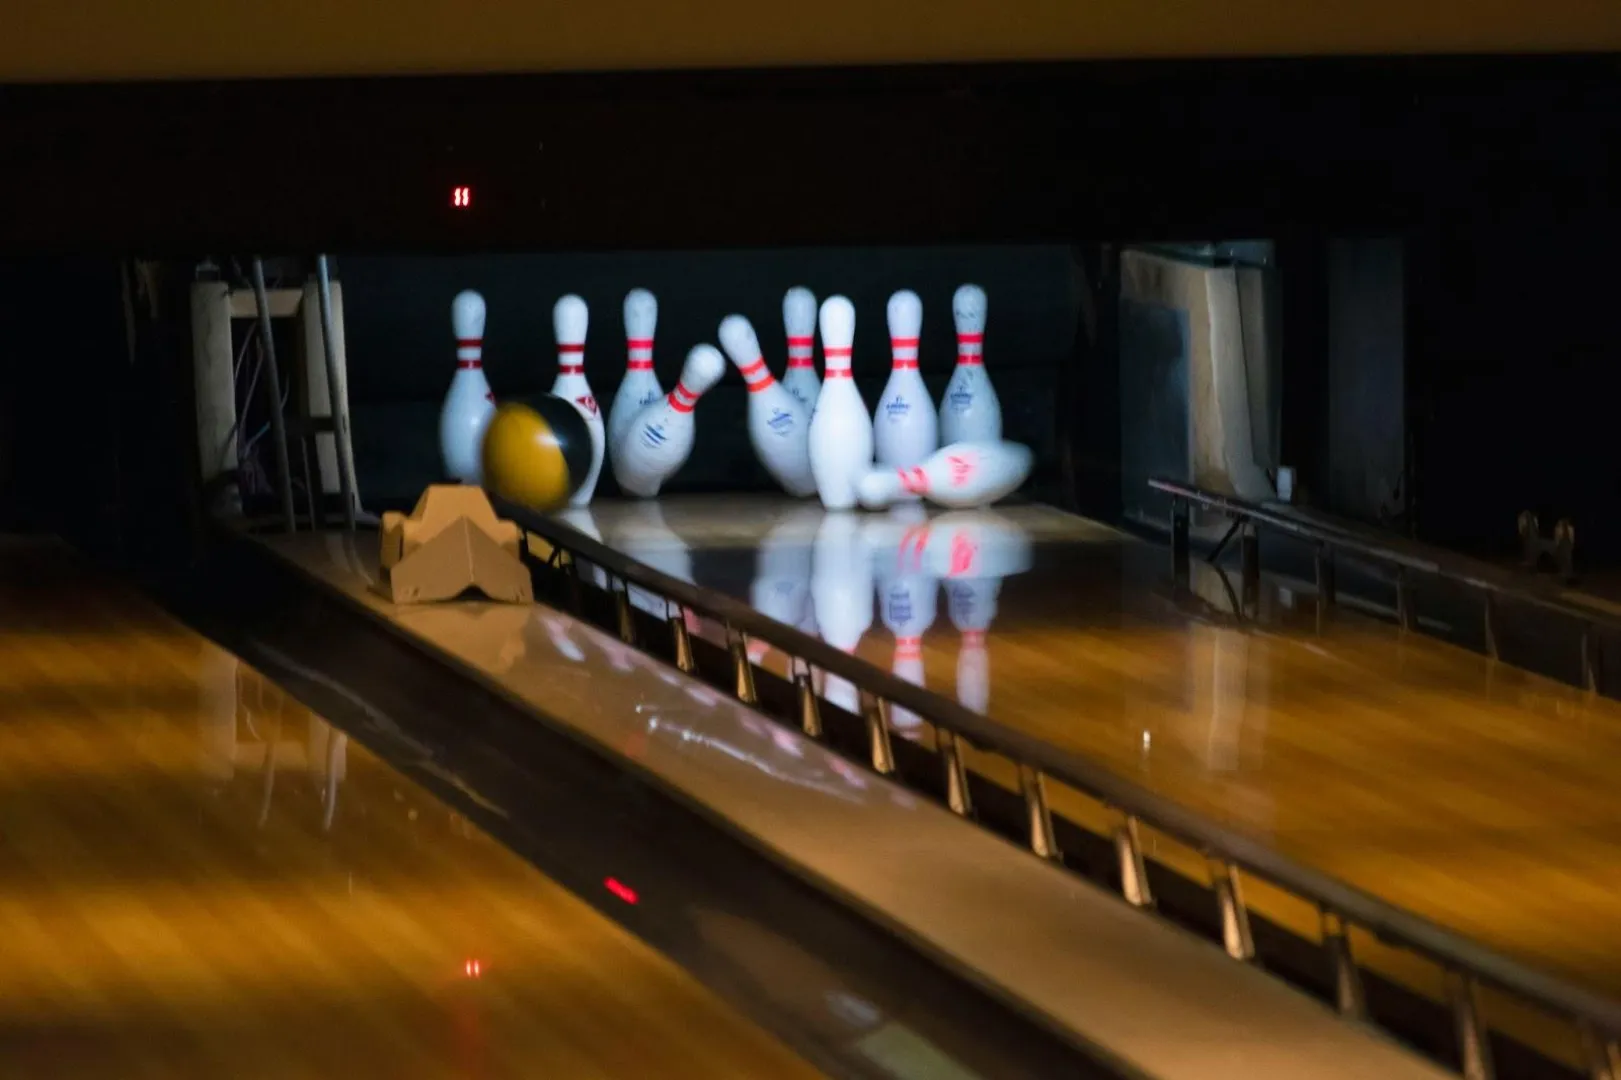 Learn how to play bowling using this beginner's guide that explains bowling techniques, rules, and etiquette so you can play with friends and family.